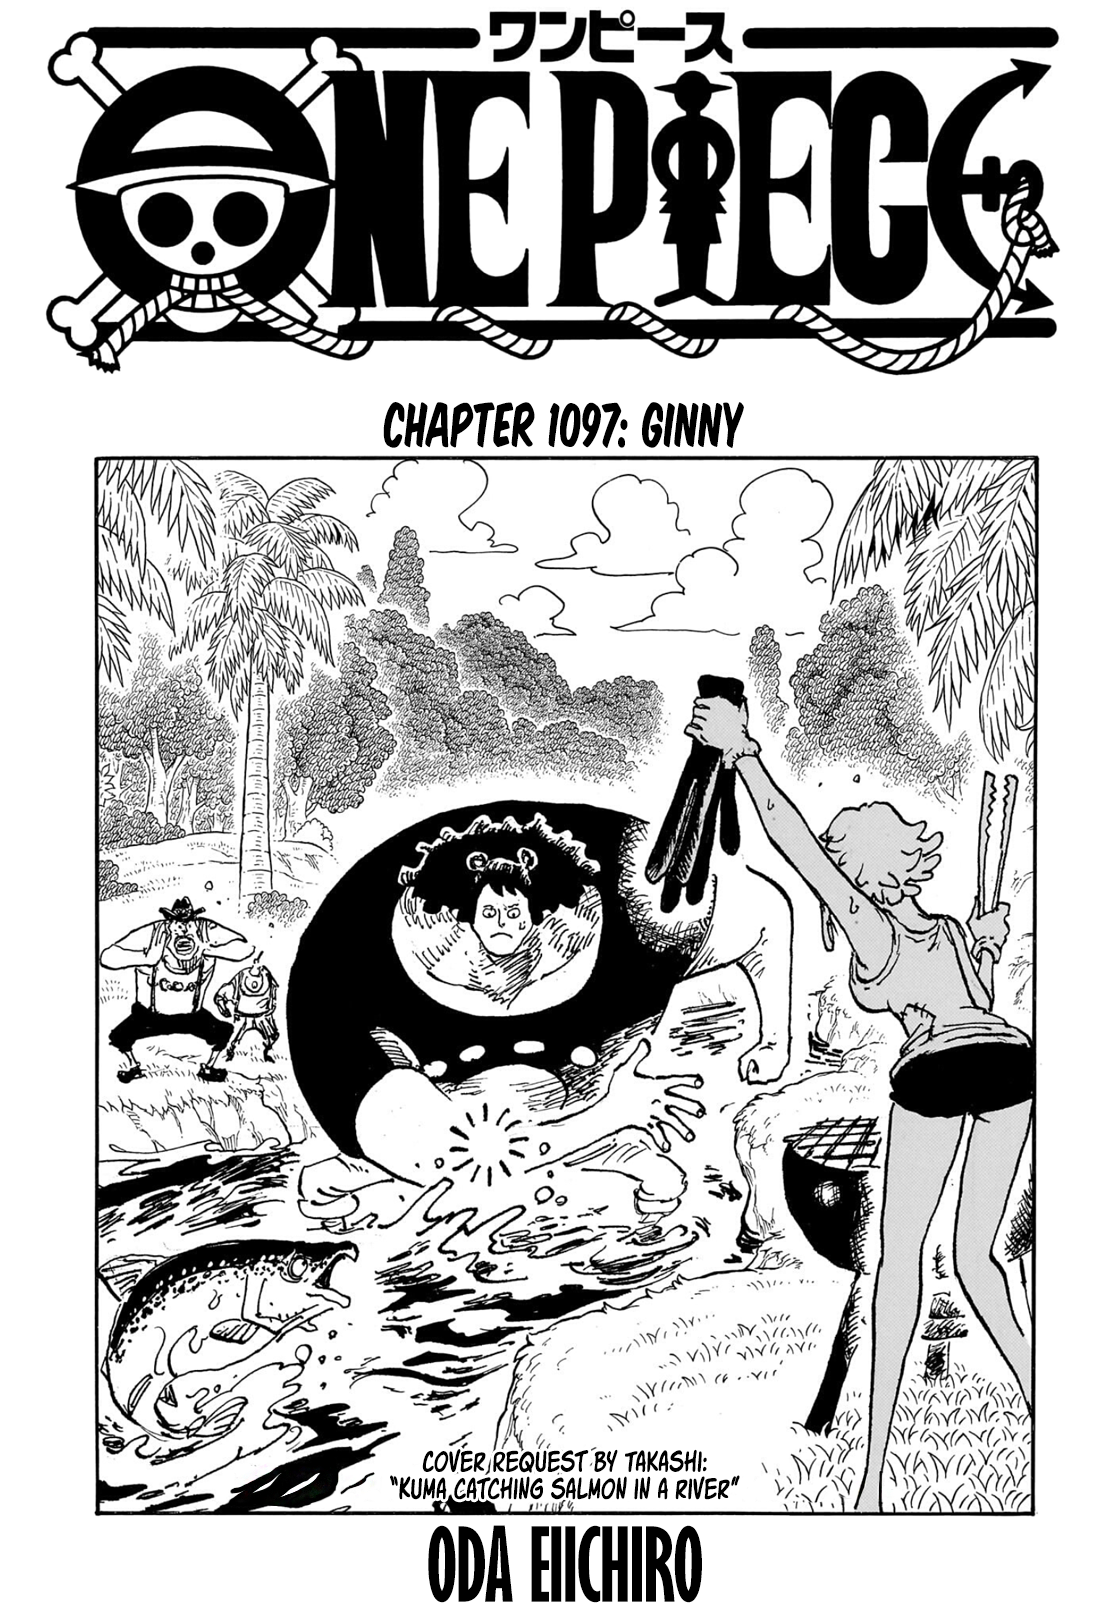 Spoiler - One Piece Chapter 1065 Spoilers Discussion